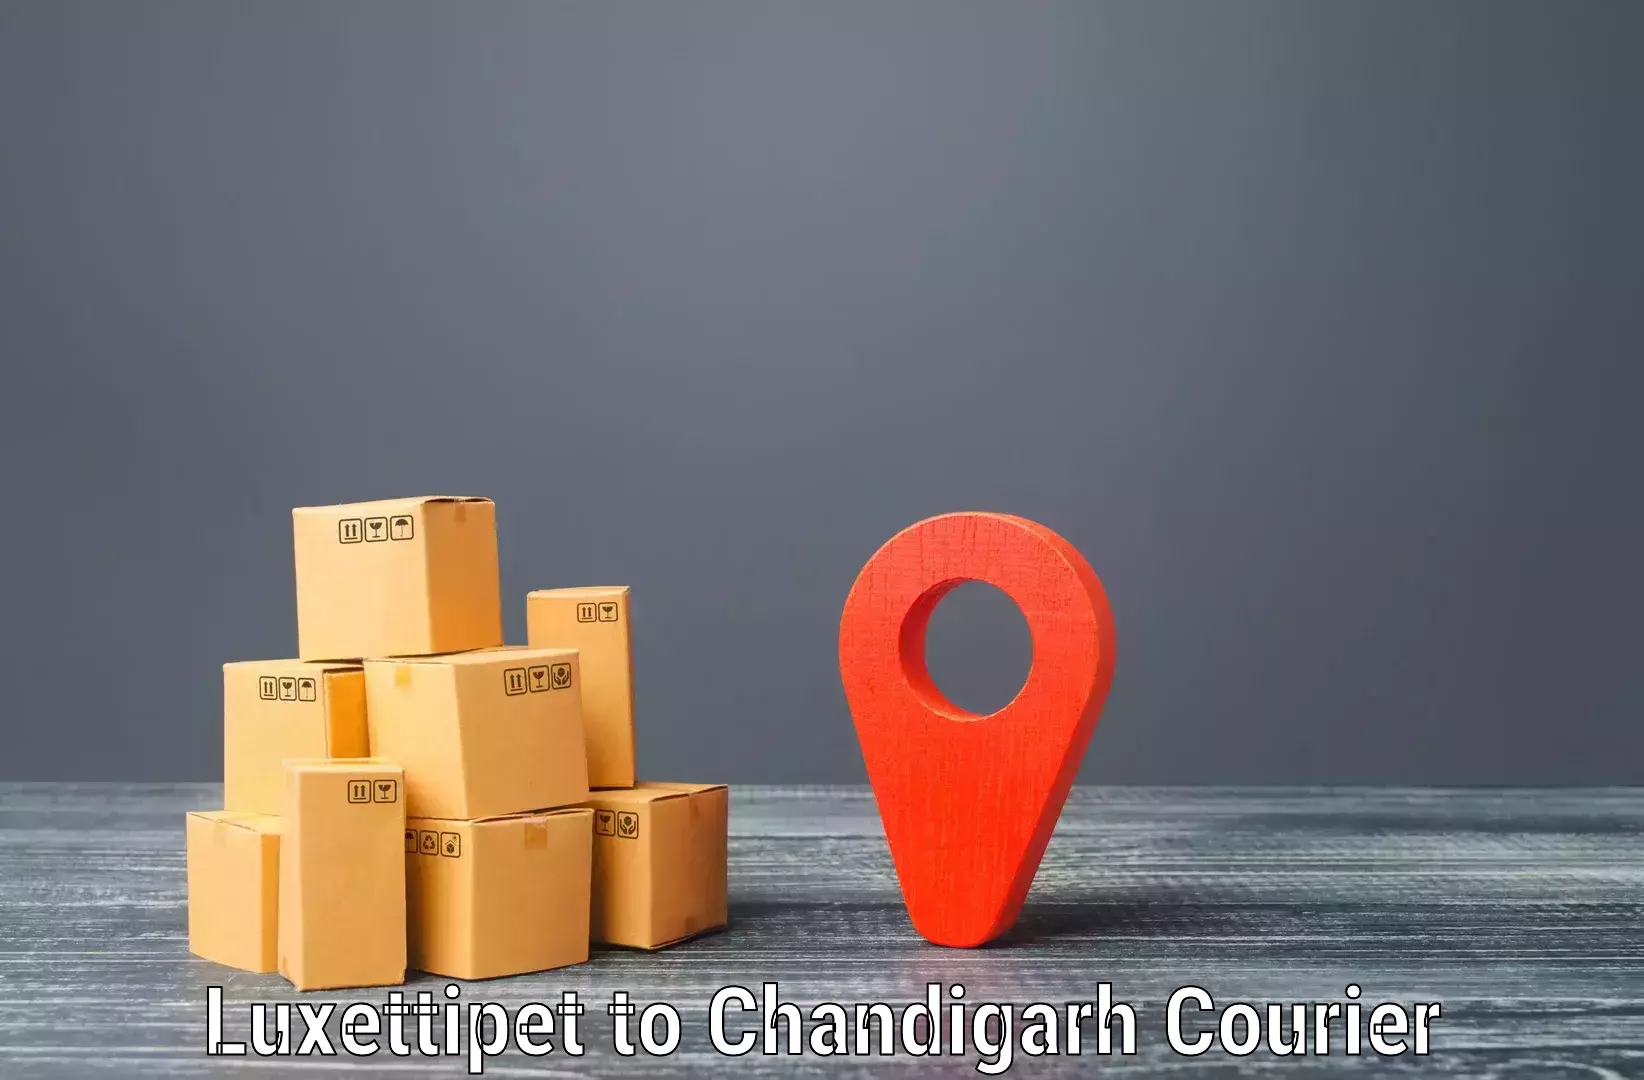 Digital courier platforms Luxettipet to Panjab University Chandigarh